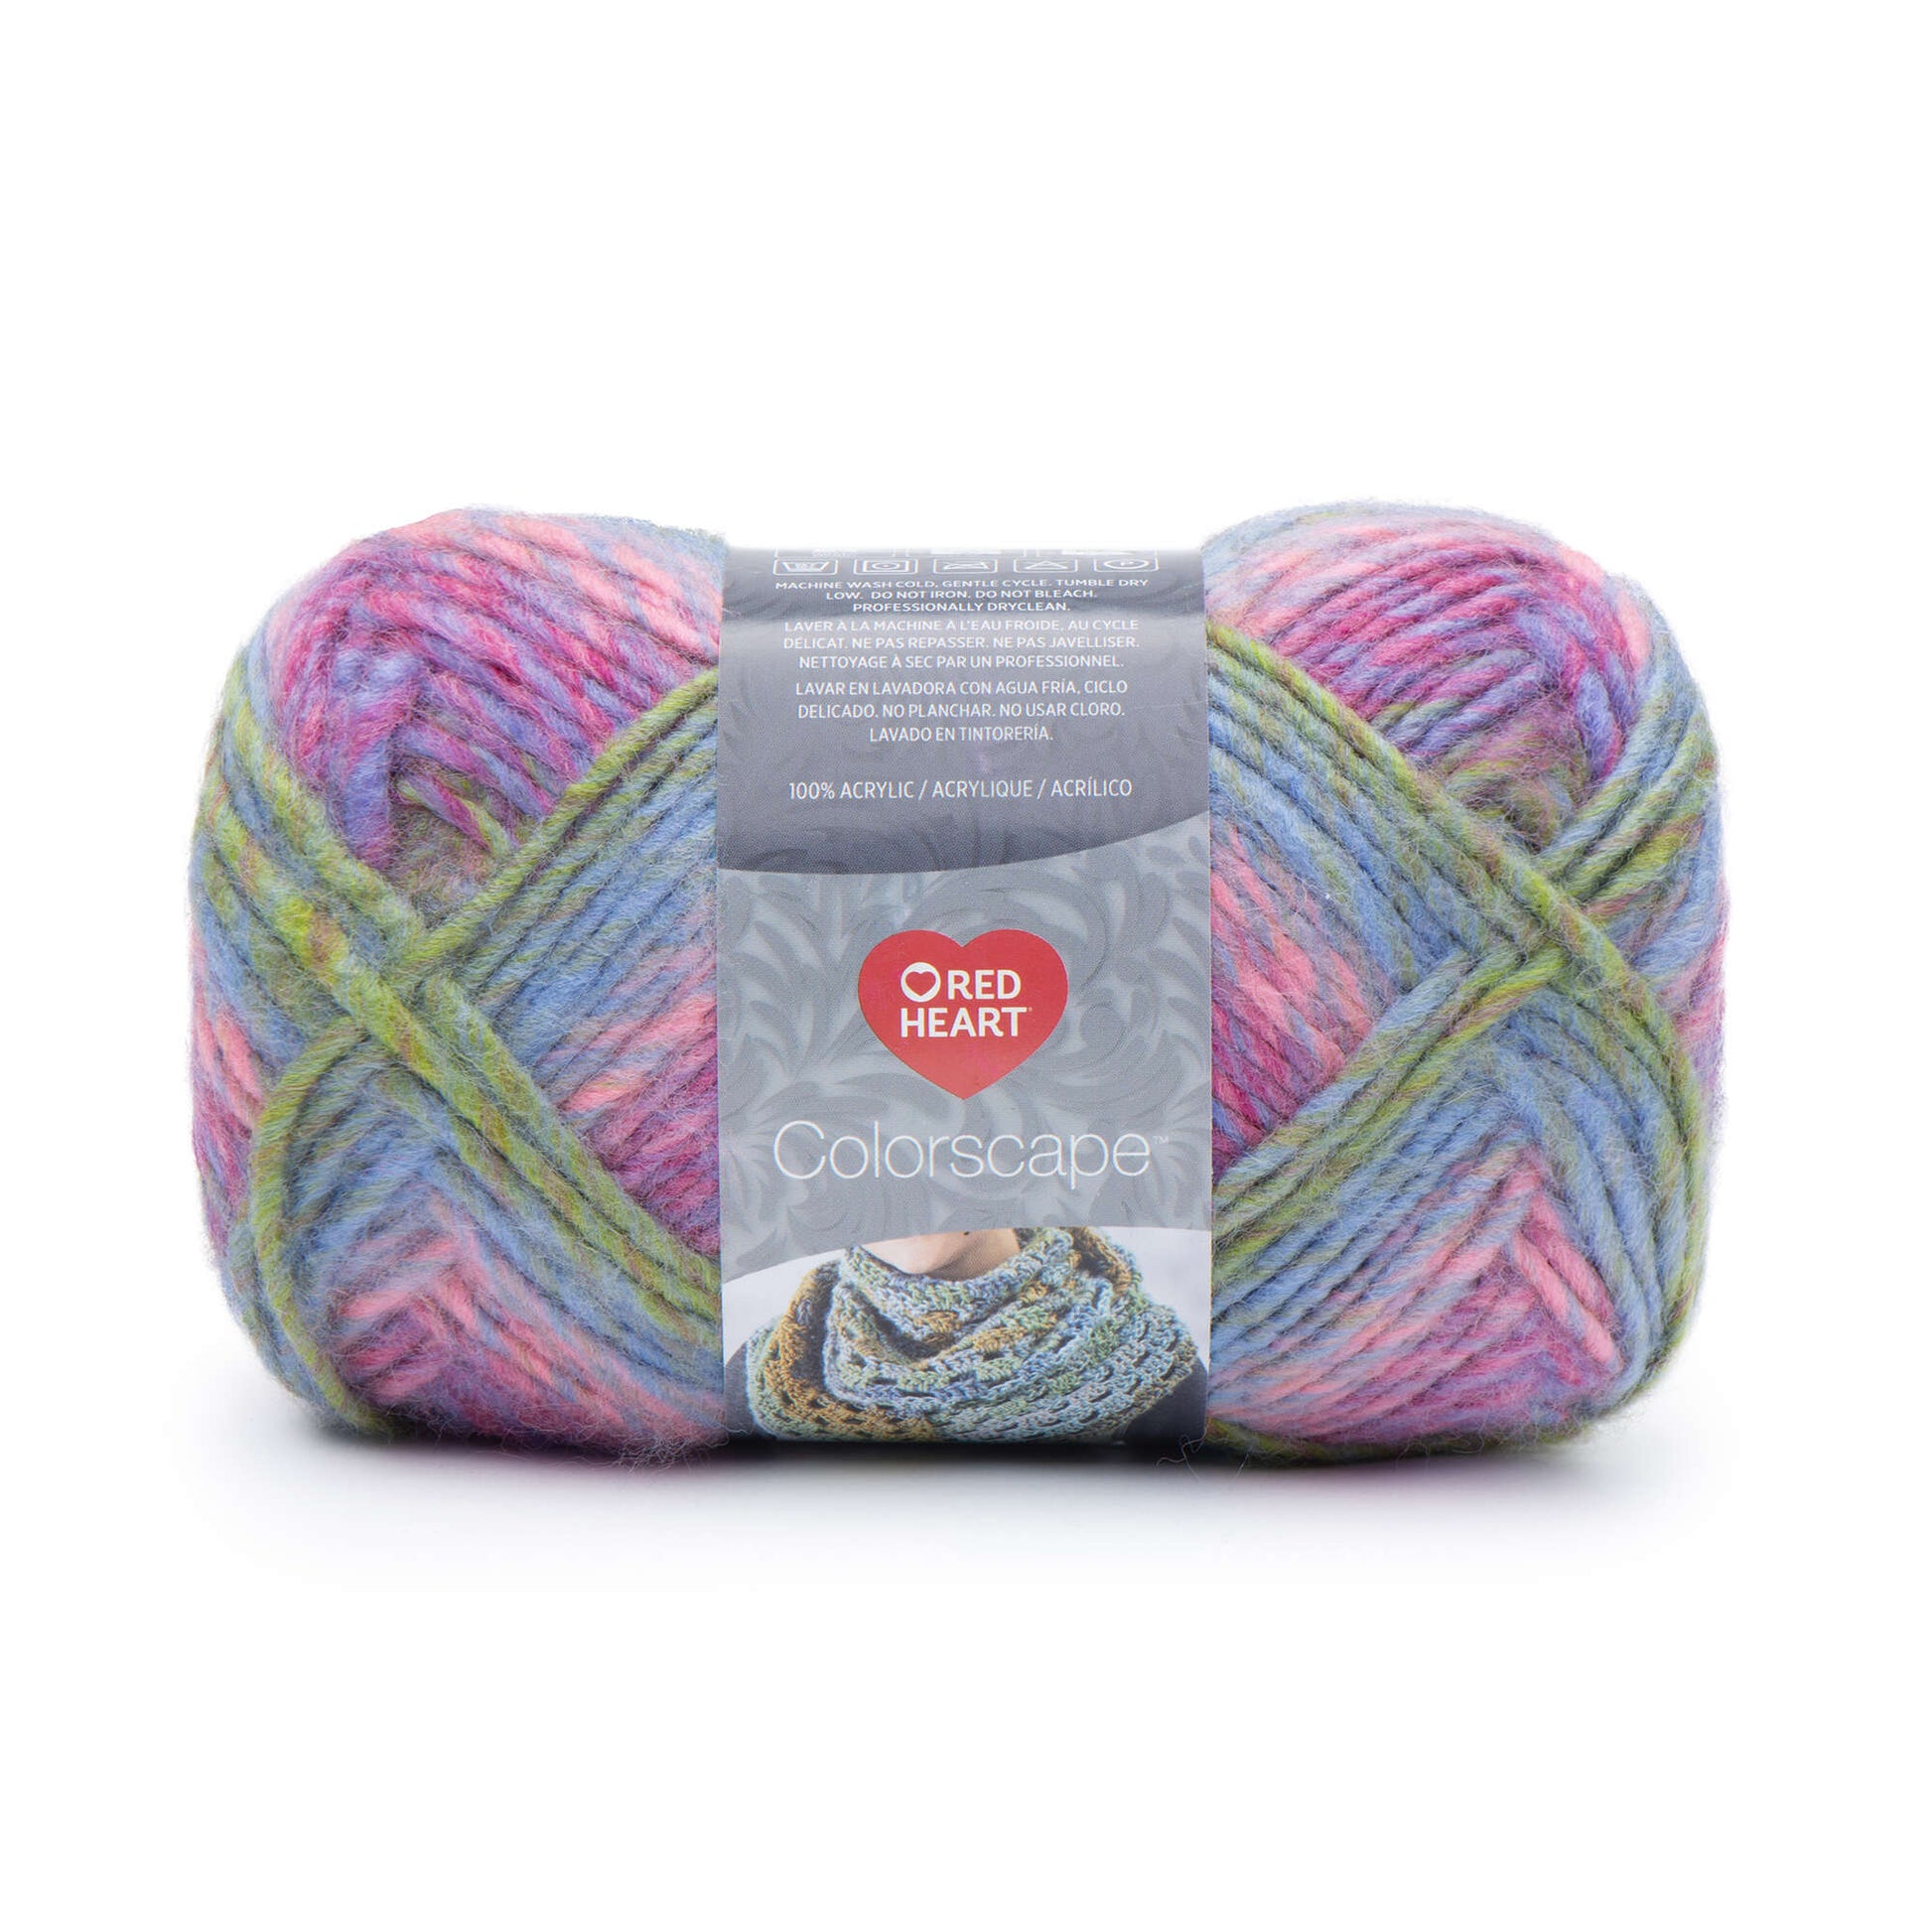 Red Heart Colorscape Yarn - Discontinued shades